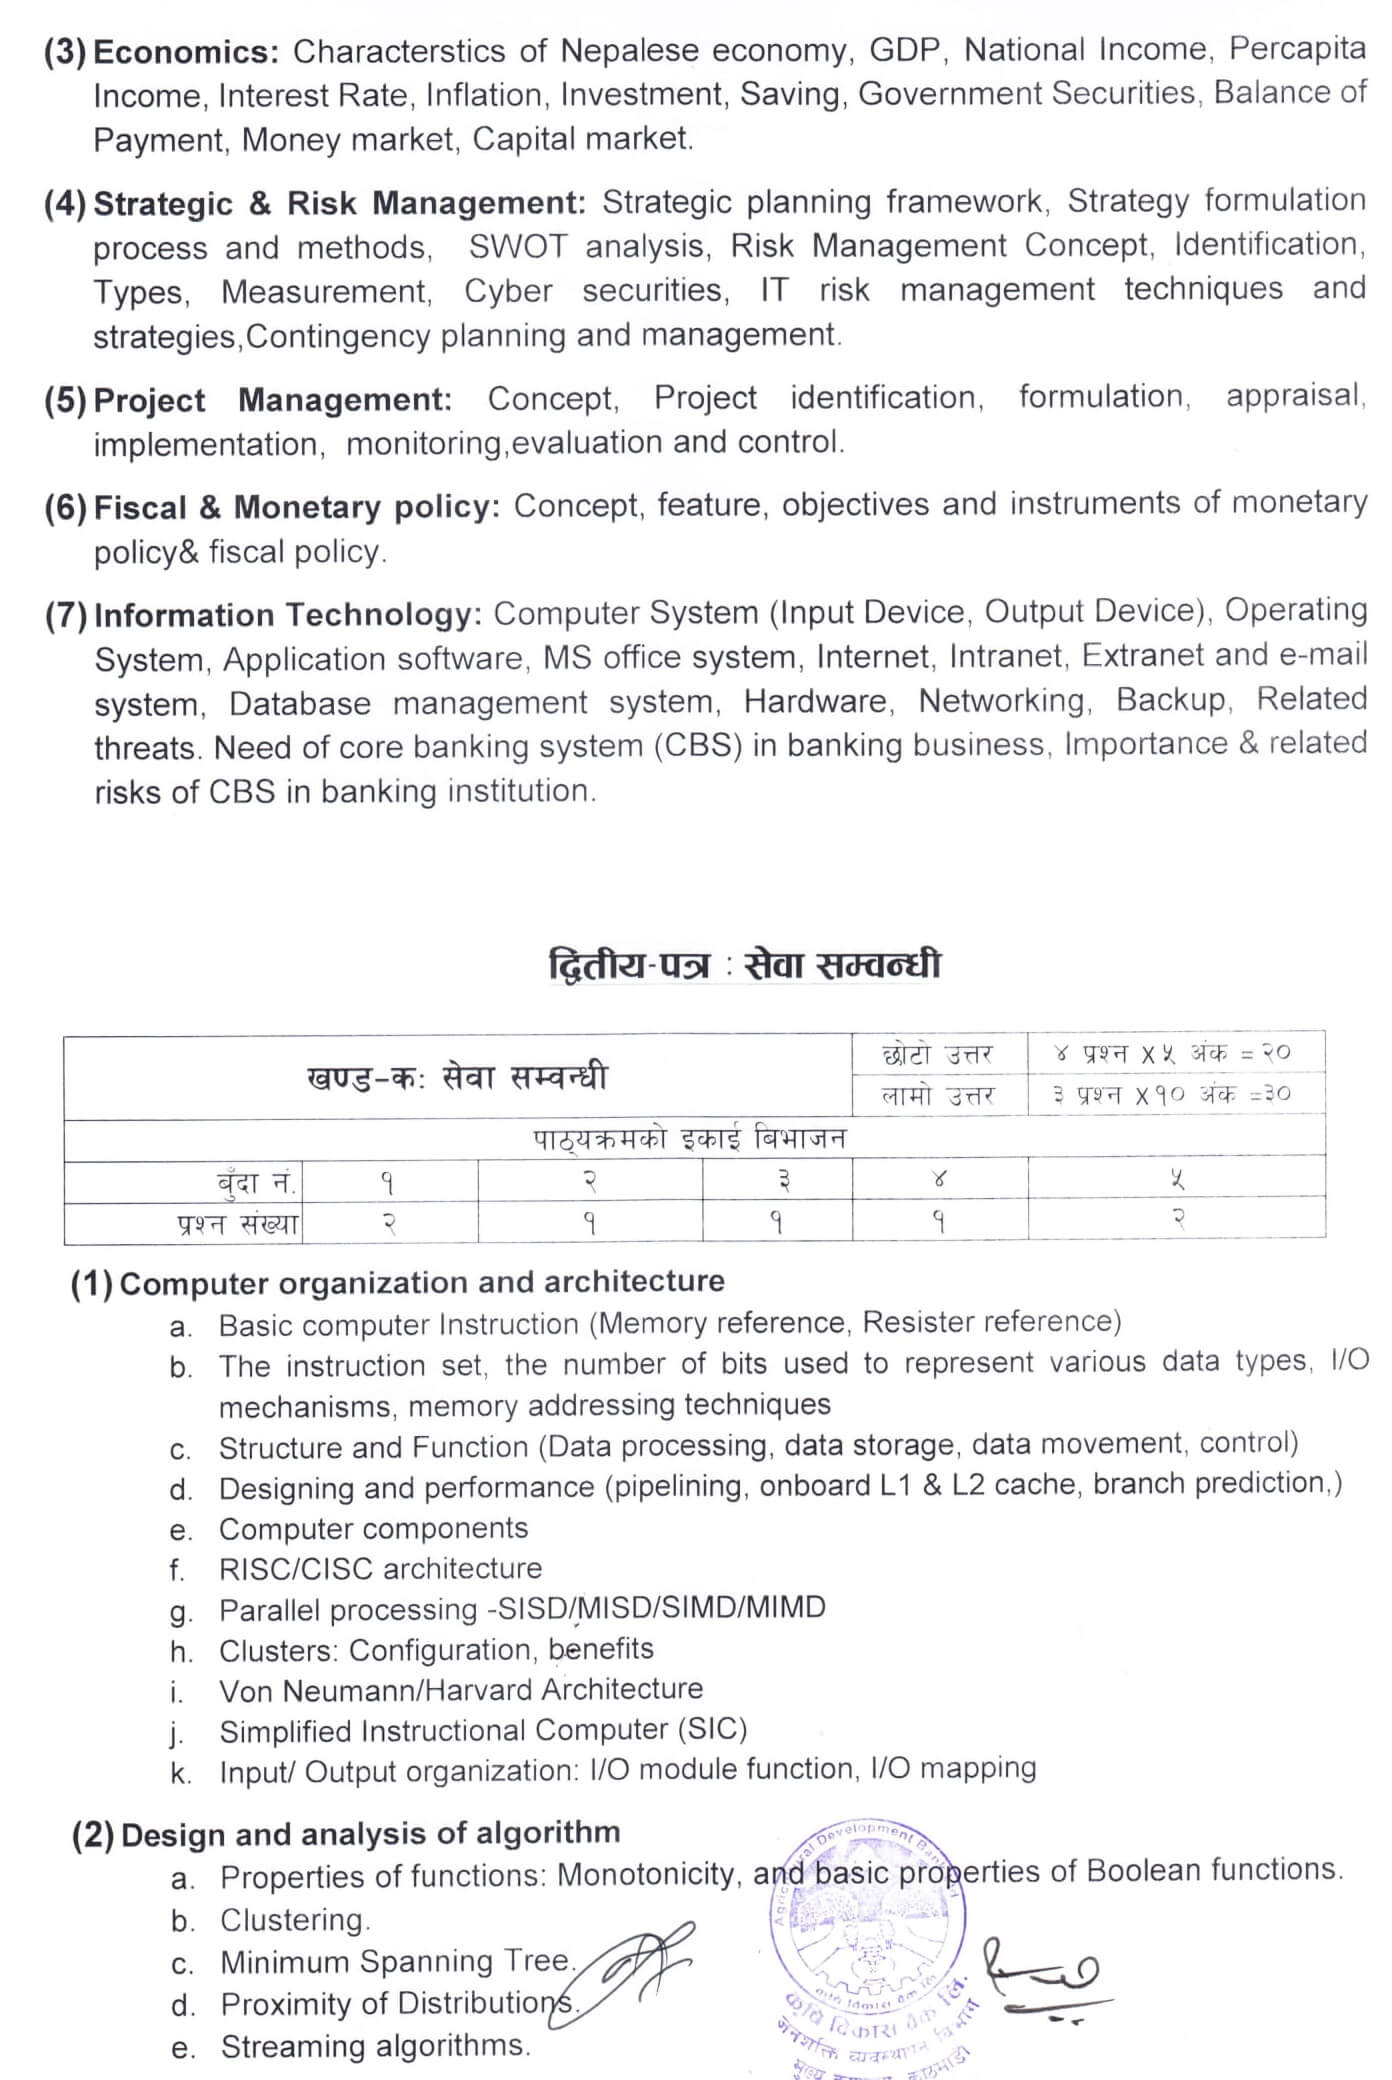 Syllabus of Agricultural Development Bank Level 6 Computer Operator